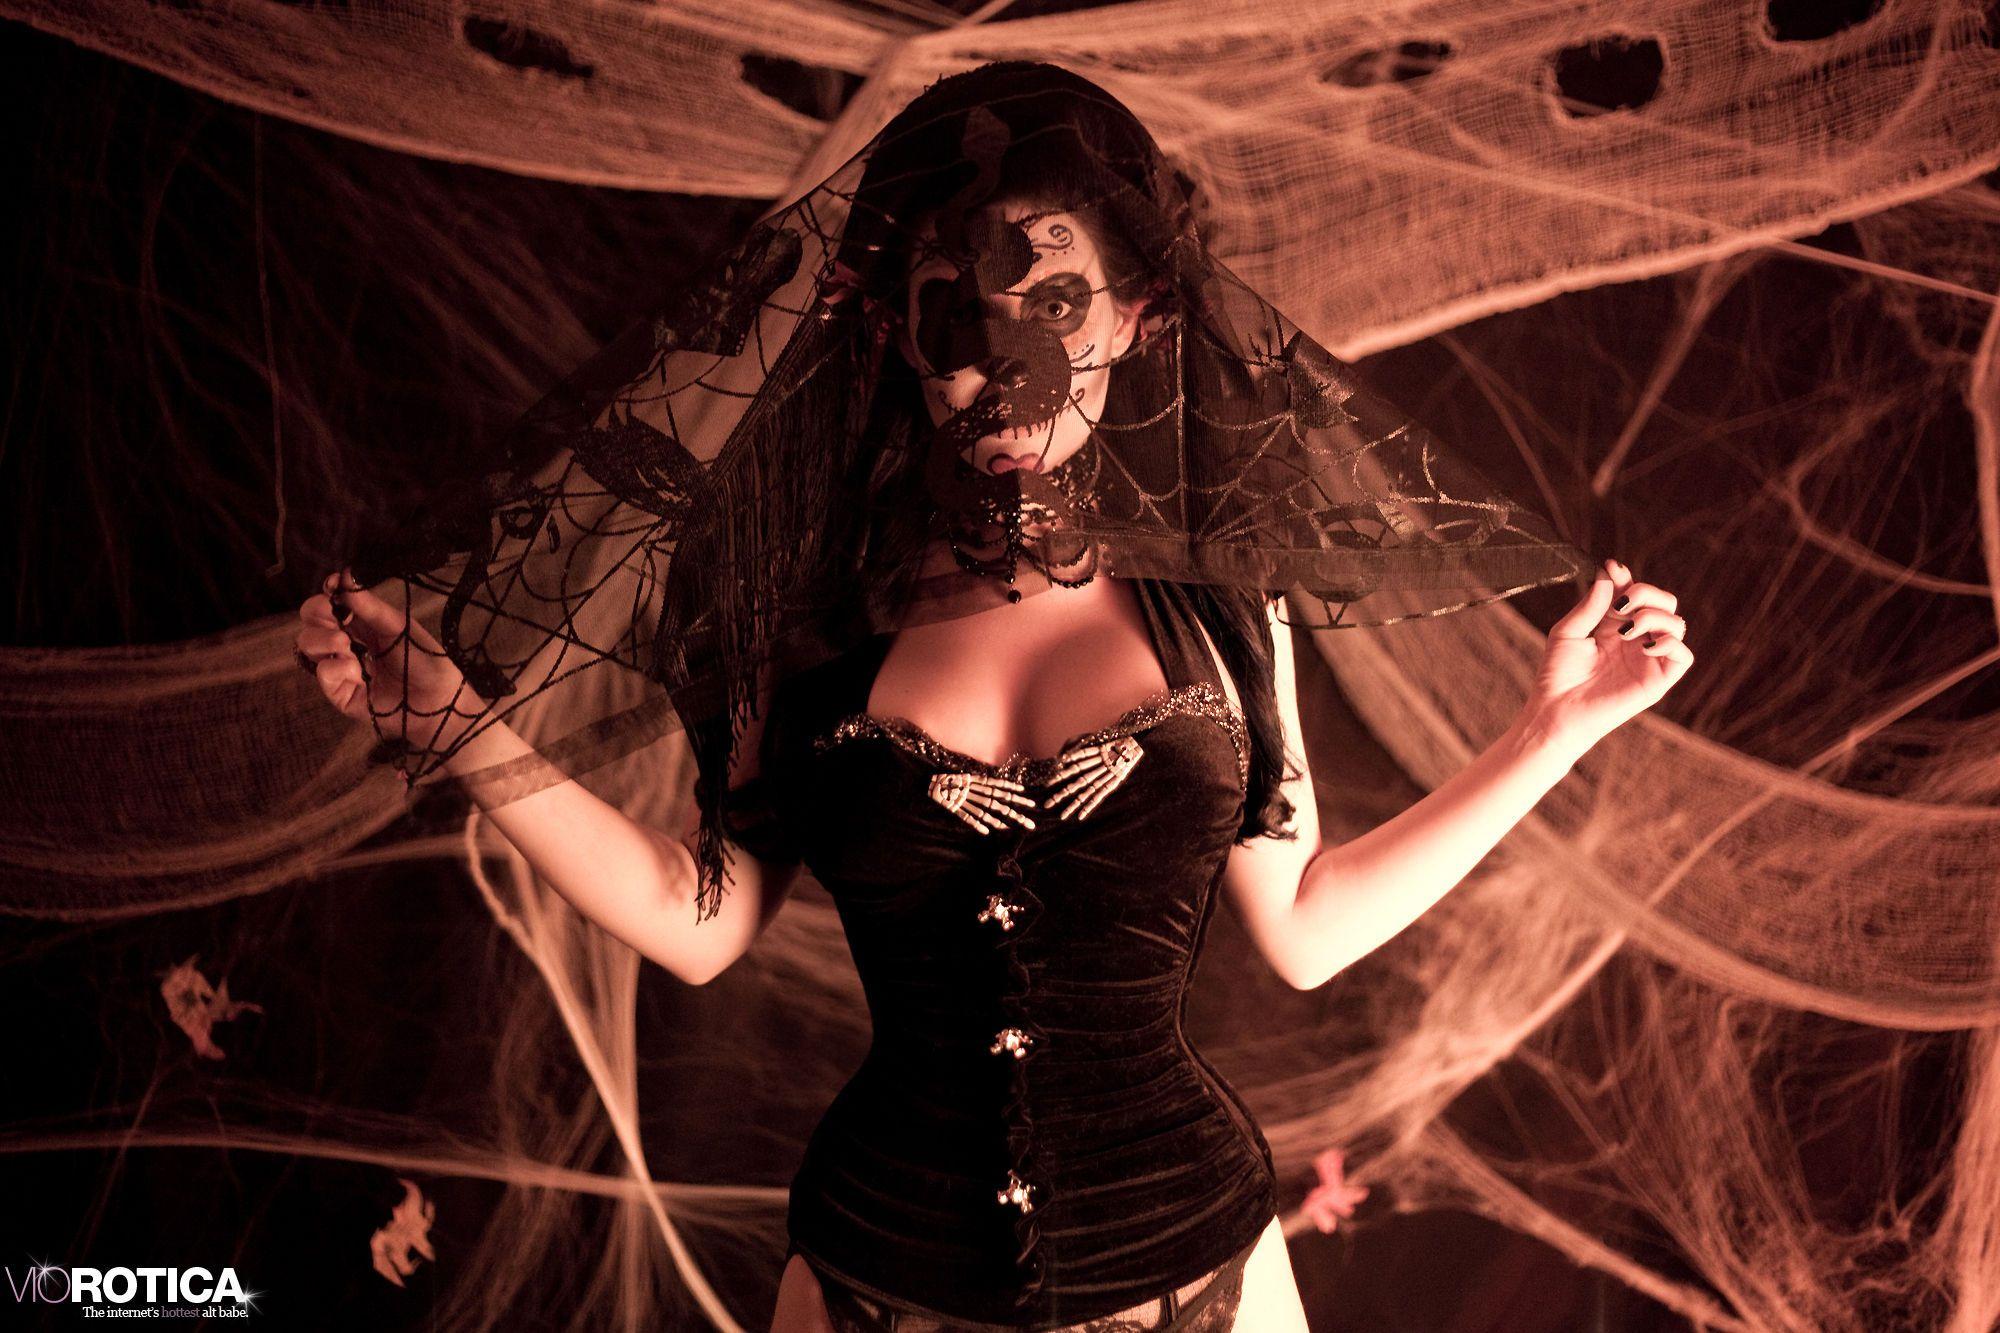 Pictures of Viorotica giving a hot gothic set #60150856